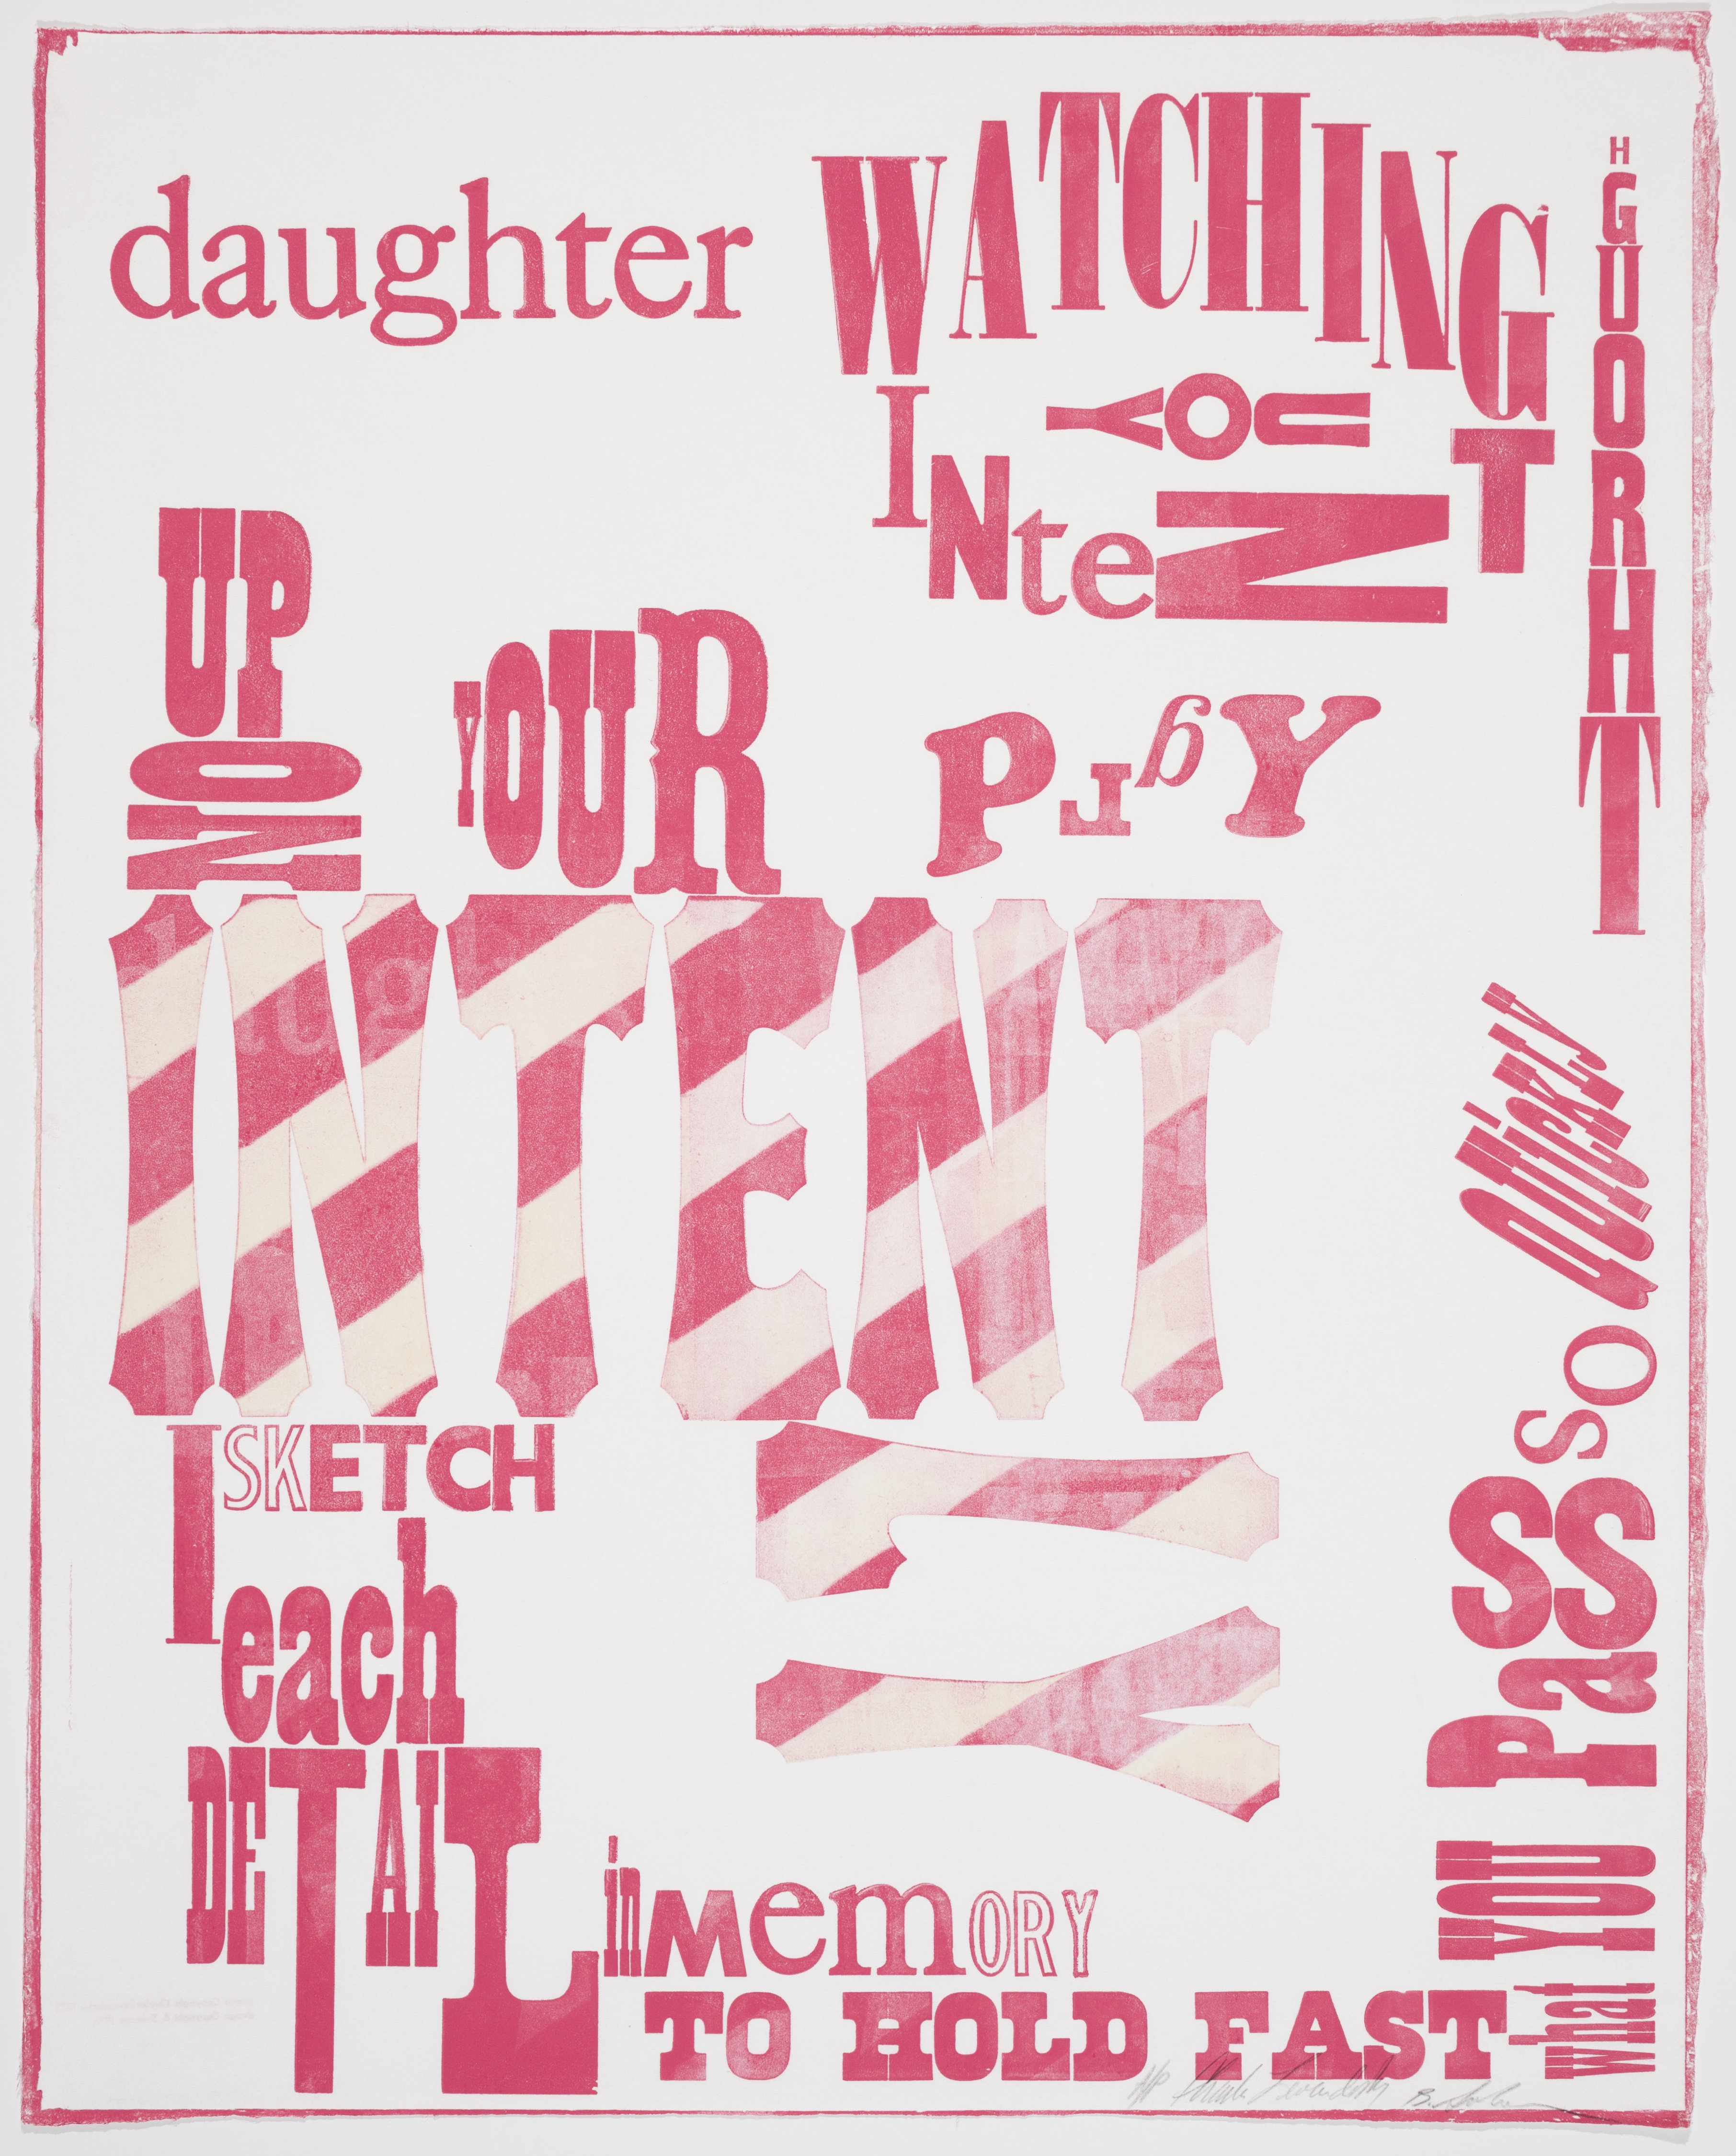 Bernard Solomon American, 1946-1995 Charles  Levendosky American  Excerpt from text: Daughter Watching You Intent Upon Your Play from the Portfolio "Words & Fonts; Poster Poems and Graphic Design" 1975 Woodcut, letterpress on paper